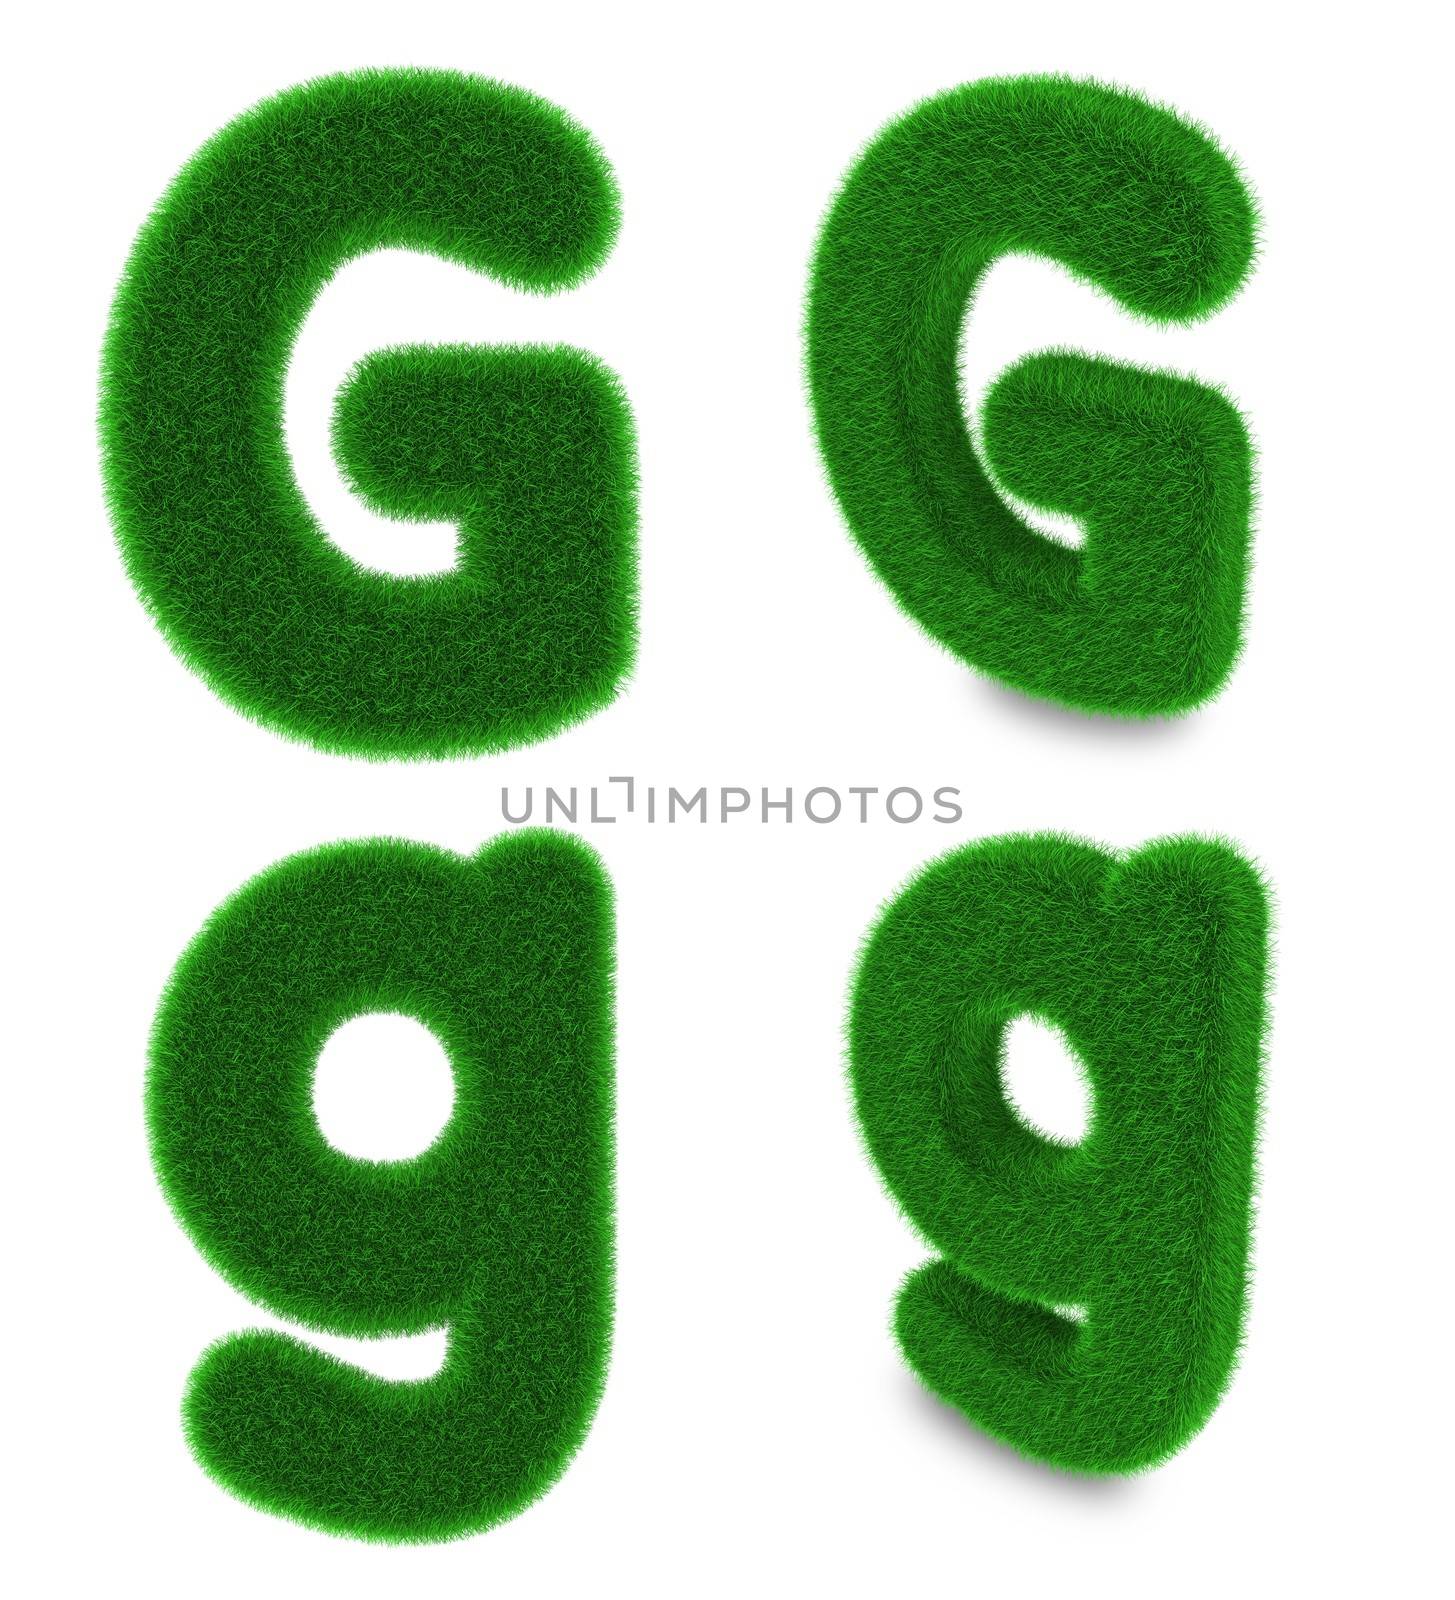 Letter G made of grass by Harvepino